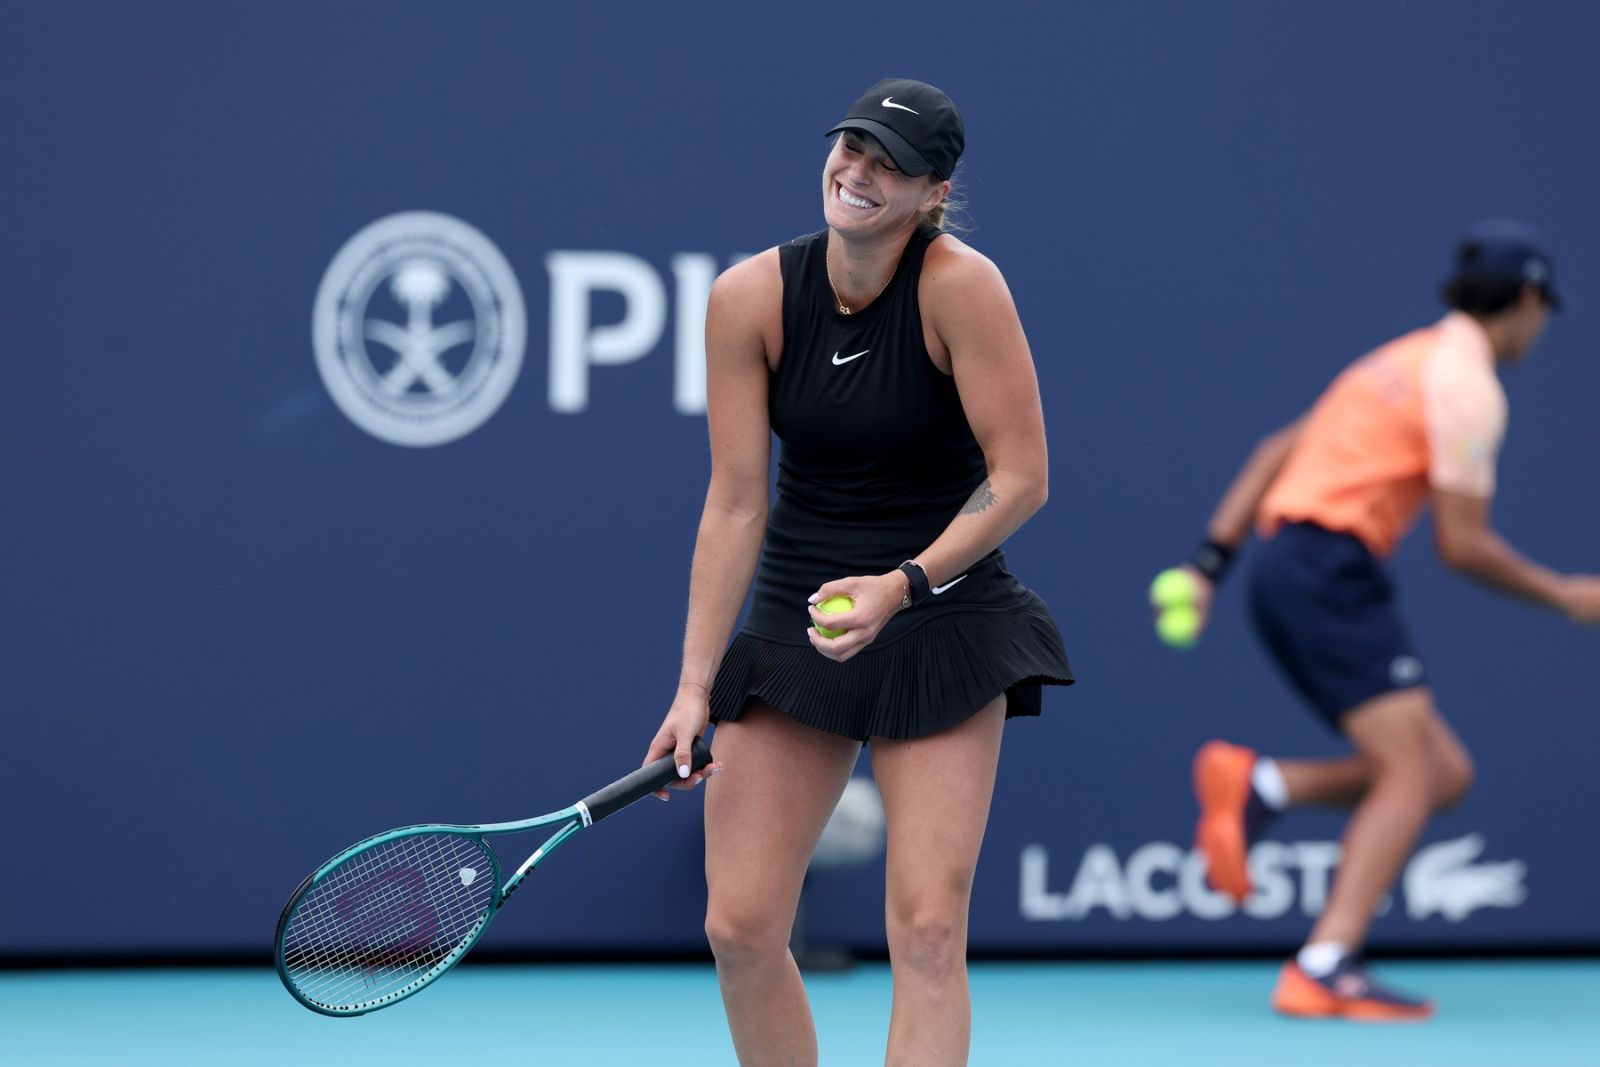 March 22, 2024, Miami Gardens, Florida, United States Of America: MIAMI GARDENS, FLORIDA - MARCH 22: Aryna Sabalenka of Belarus defeats Paula Badosa of Spain in the second round on Day 7 of the Miami Open Presented by Itau at Hard Rock Stadium on March 22, 2024 in Miami Gardens, Florida ...People:  Aryna Sabalenka,Image: 858912378, License: Rights-managed, Restrictions: , Model Release: no, Credit line: SMG / Zuma Press / Profimedia